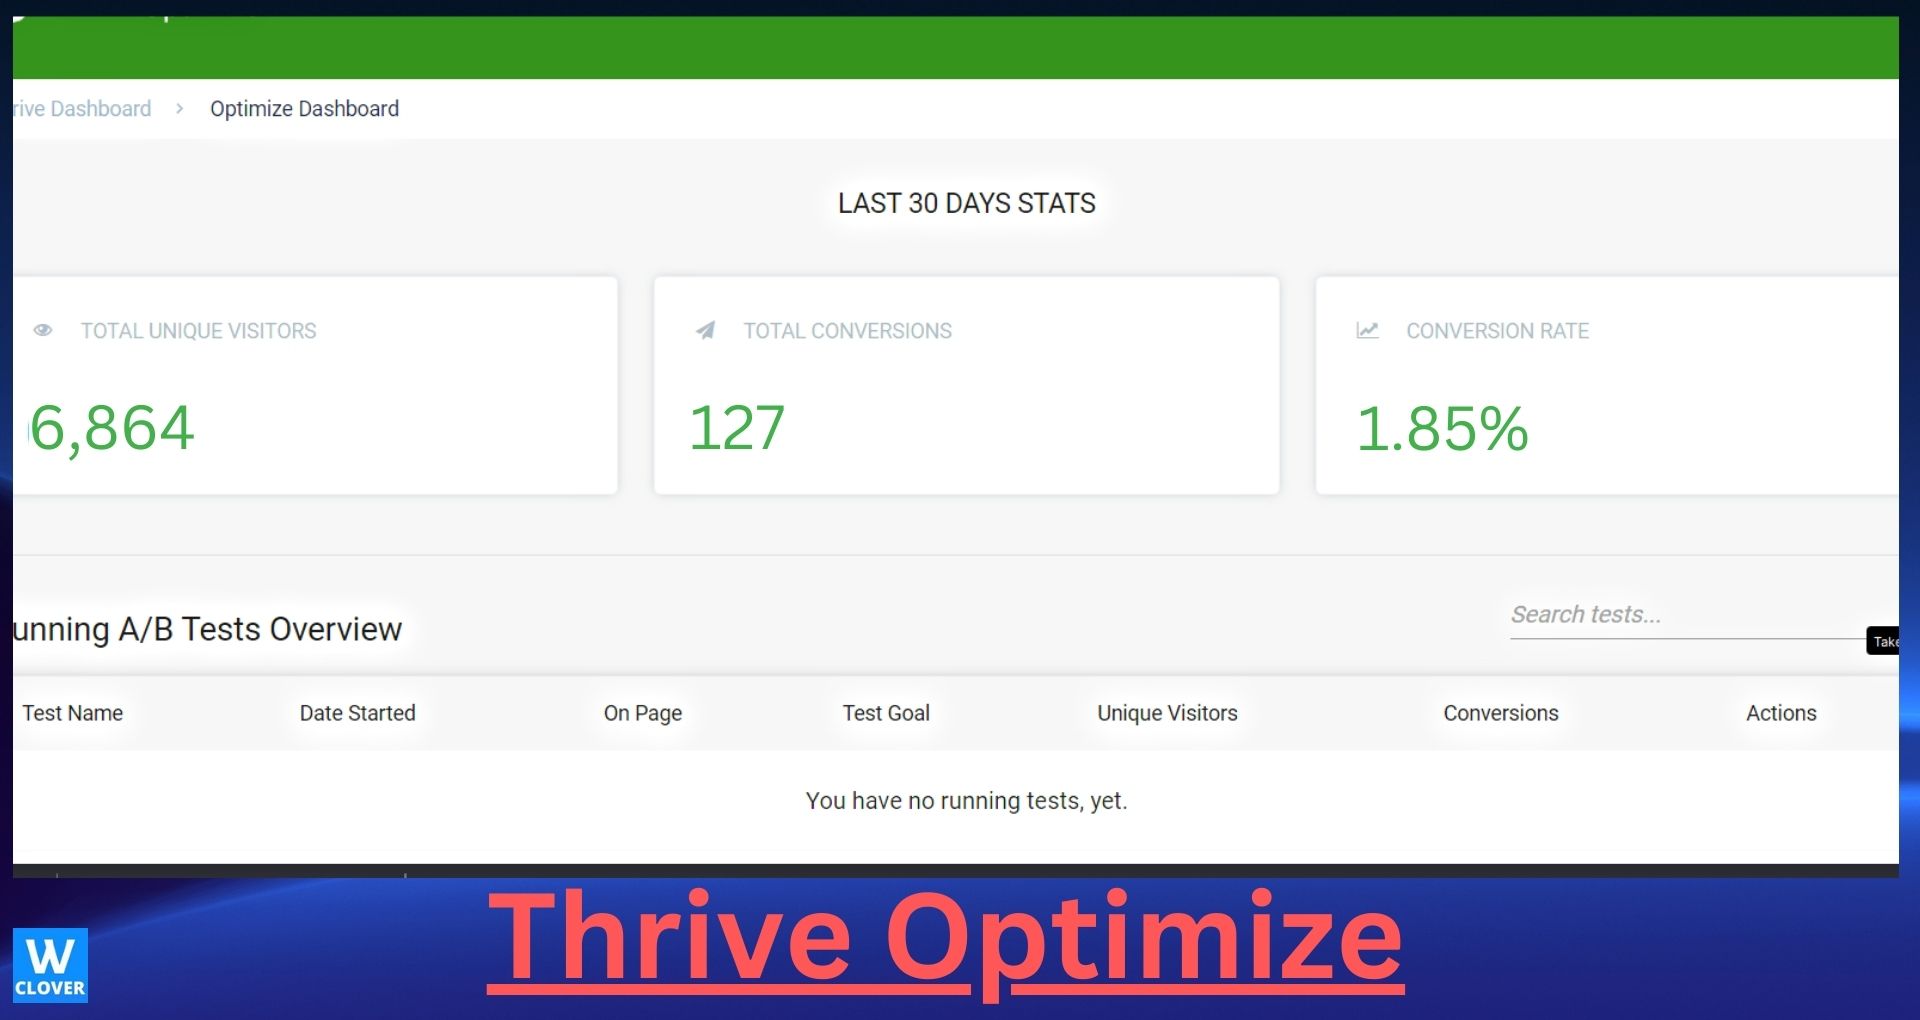 Thrive Optimize dashboard with stats displayed